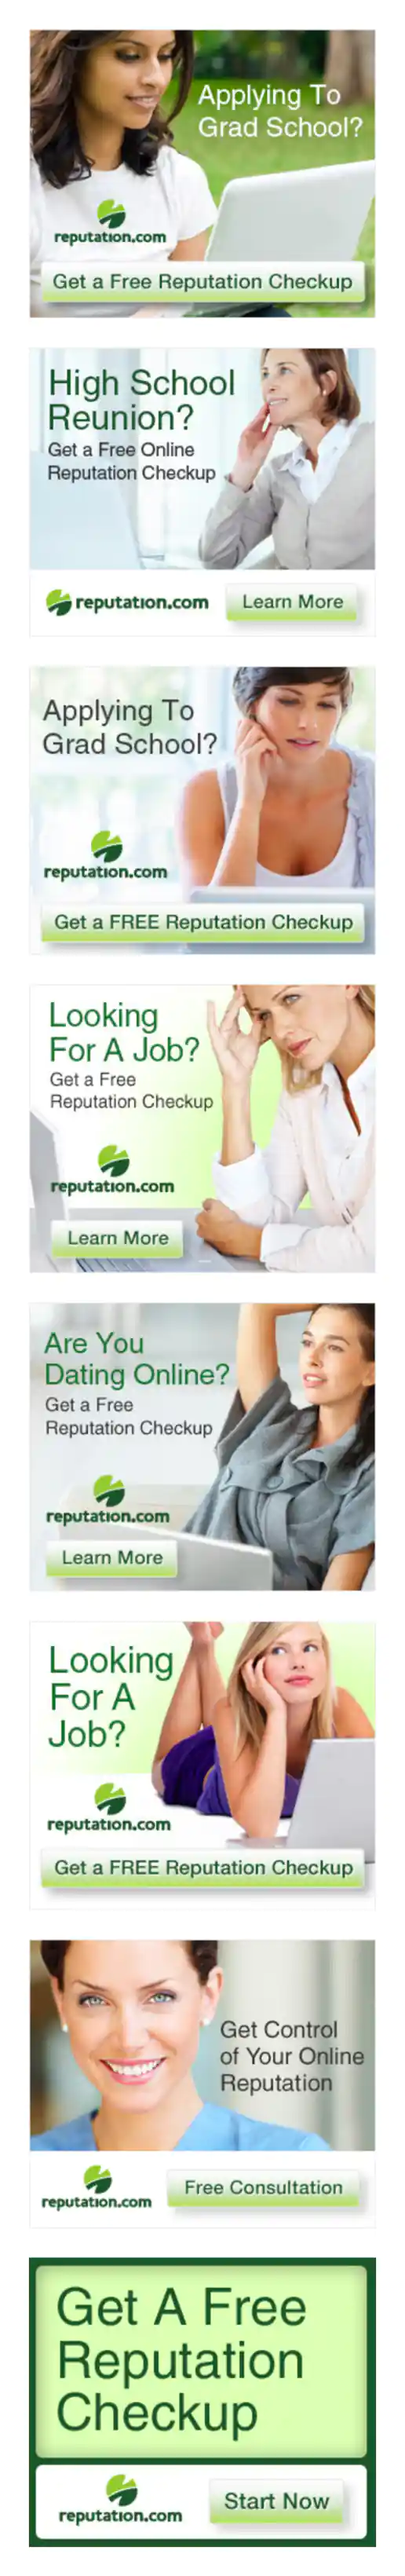 Reputation.com Free Checkup Positive Message Banners